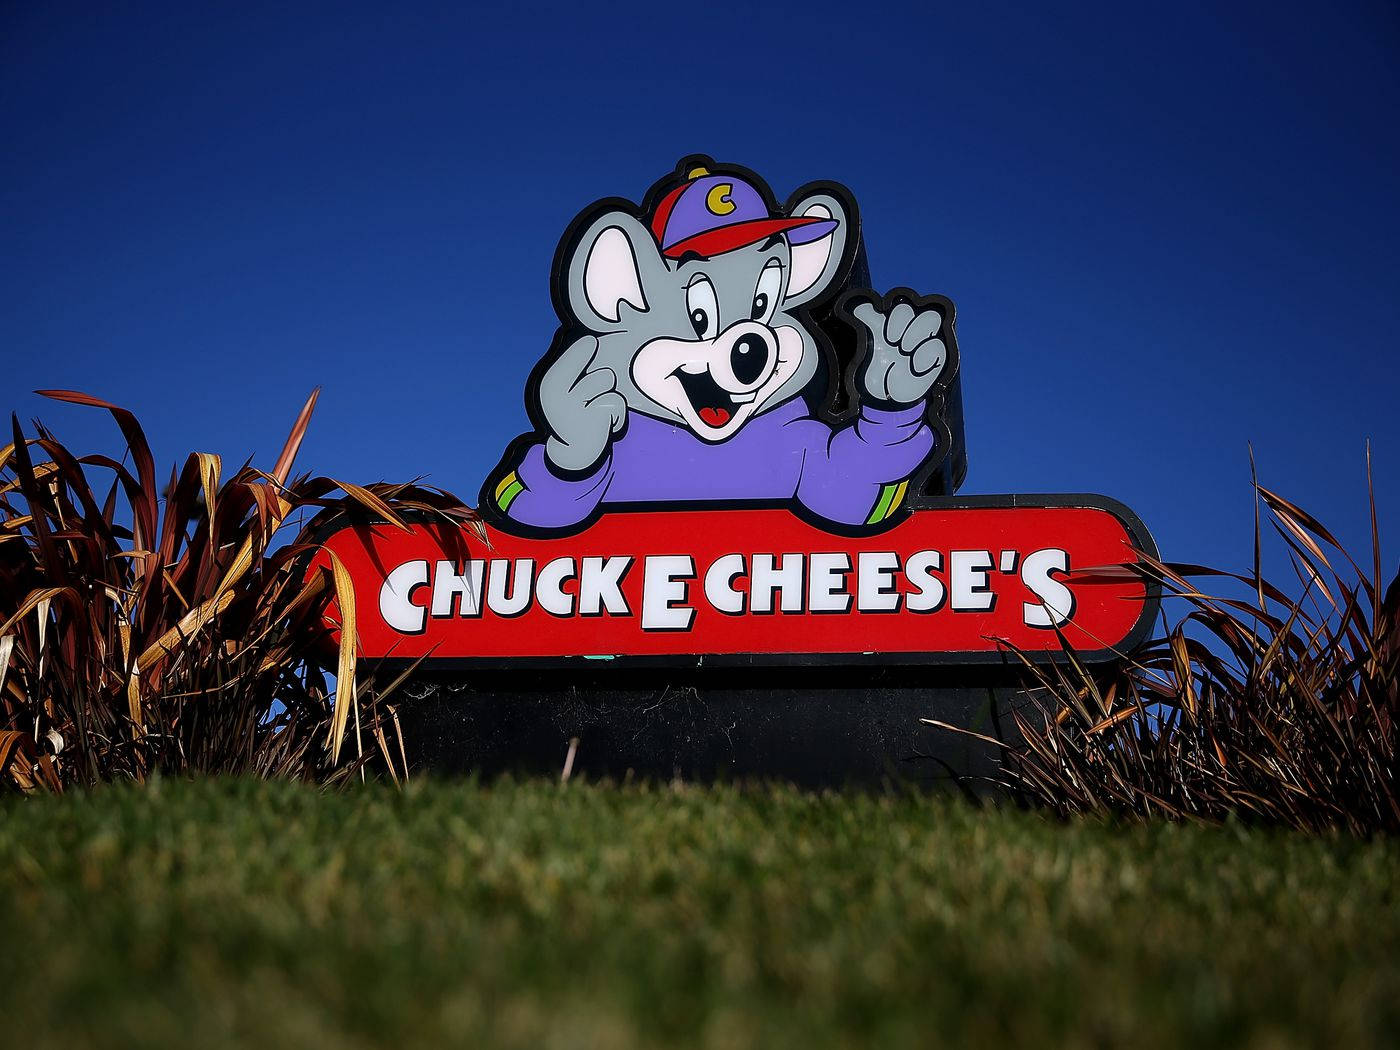 Top 999 Chuck E Cheese Wallpaper Full HD 4K Free To Use